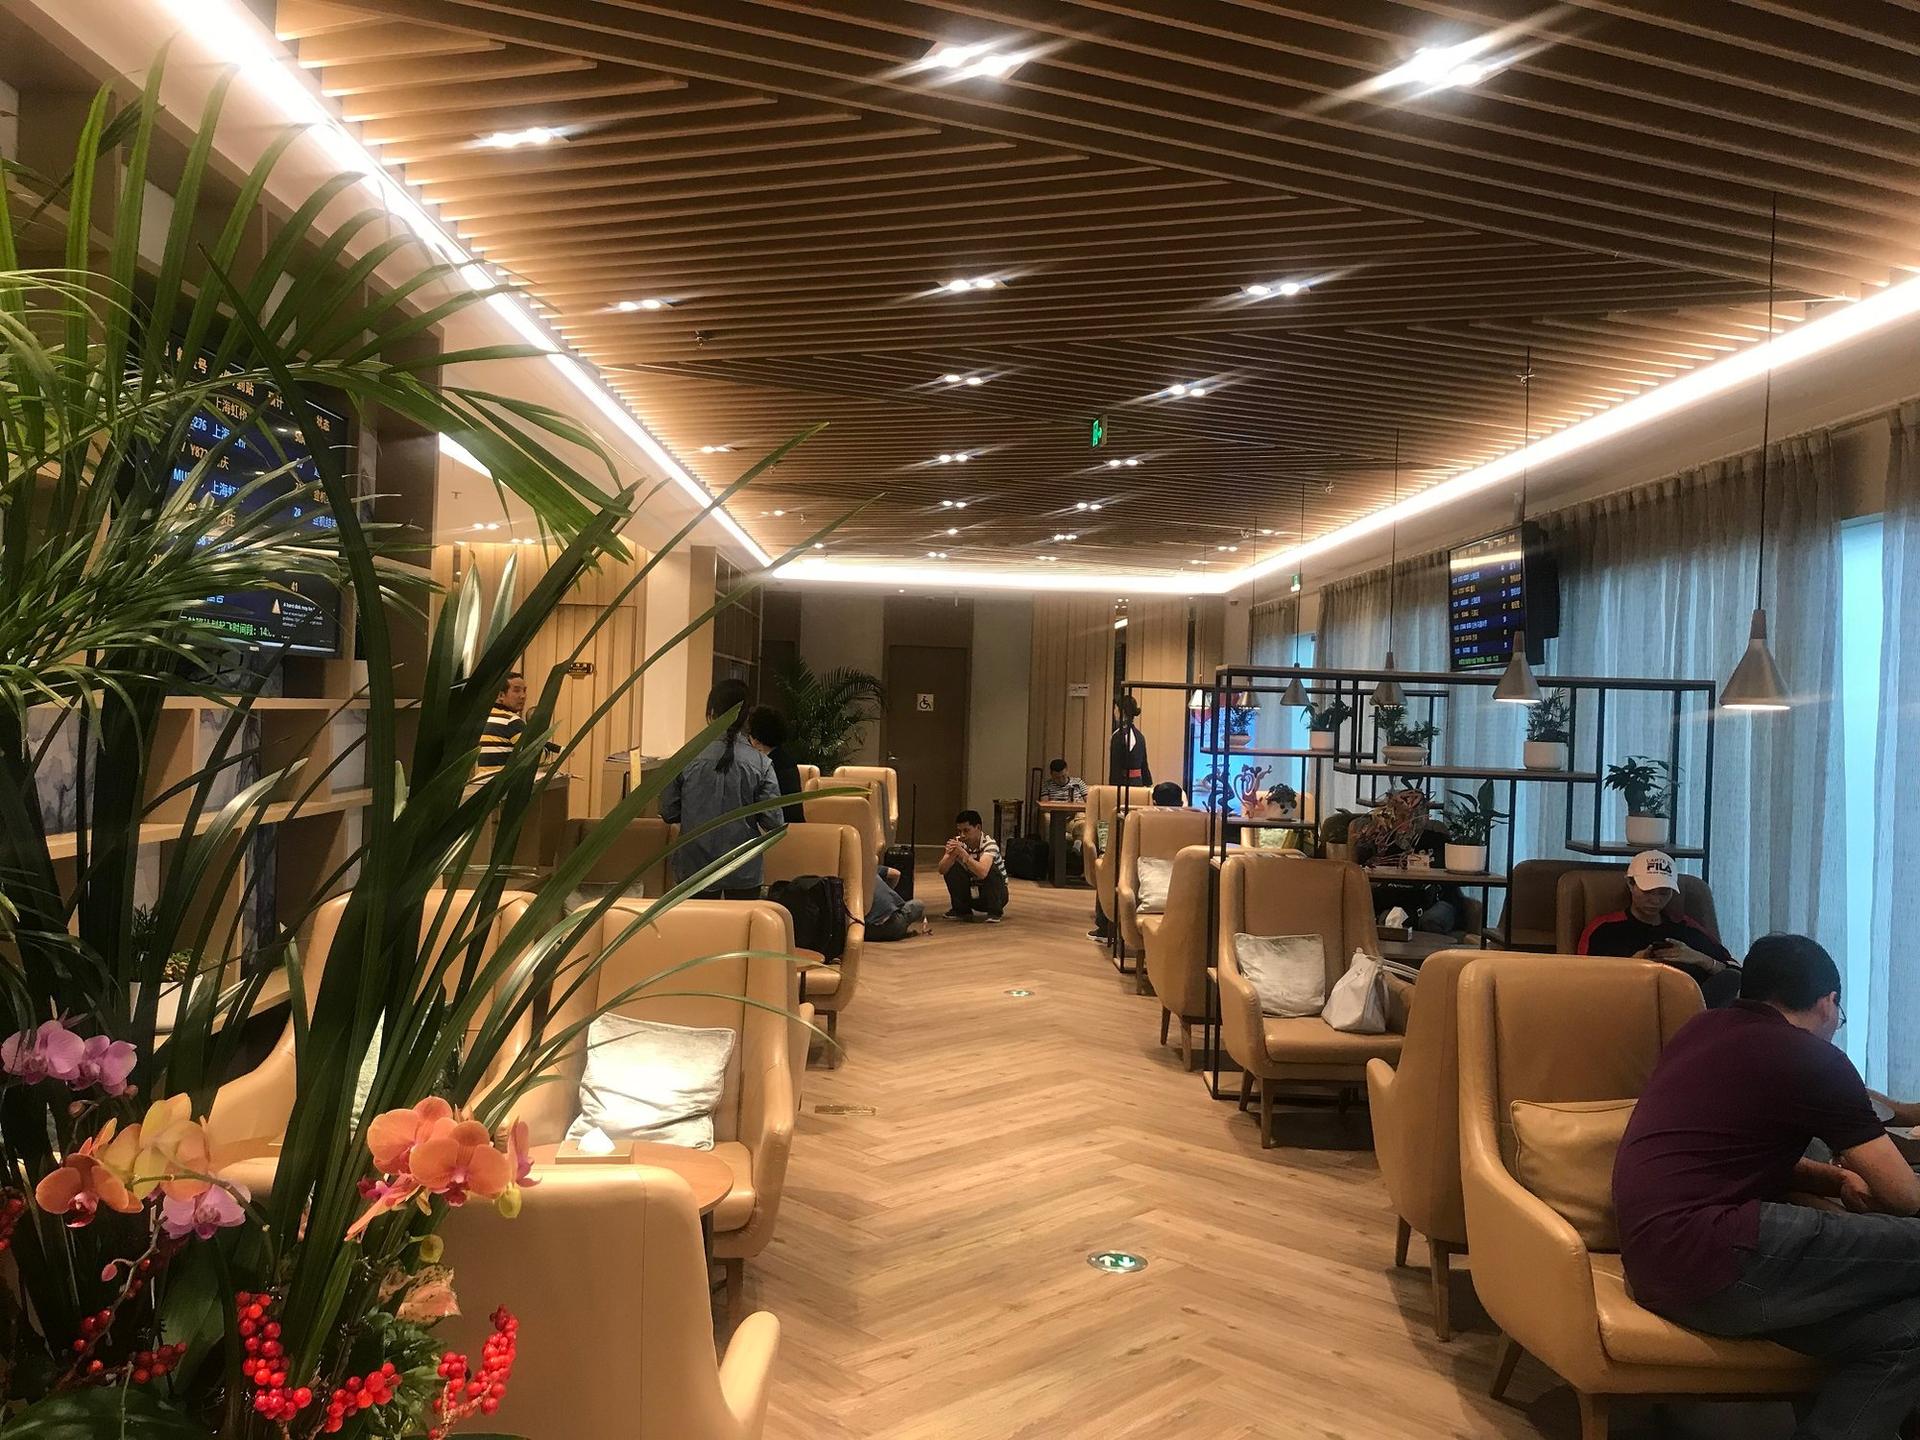 Shenzhen Airport First & Business Class Lounge (Joyee 2) image 5 of 9